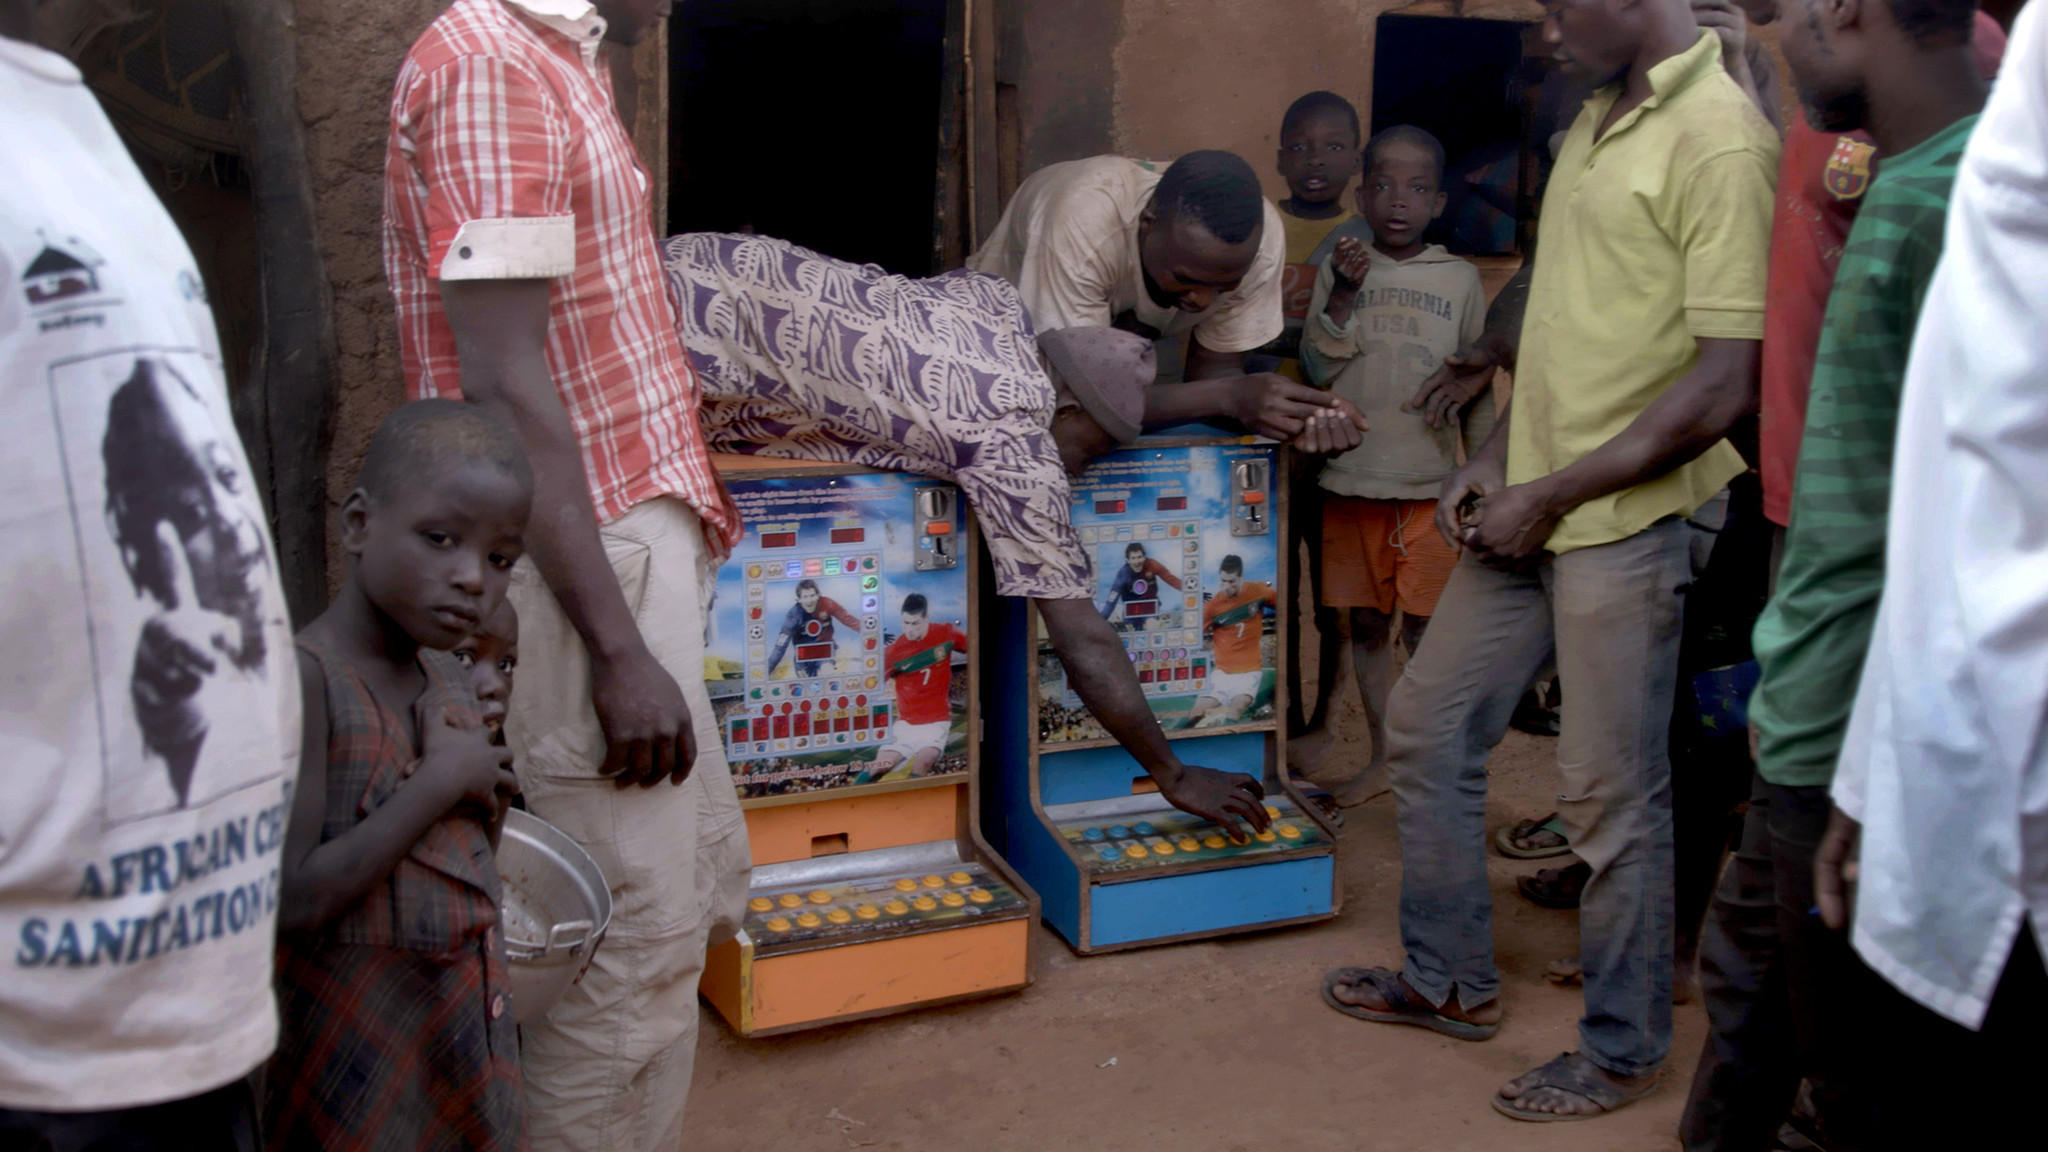 Villagers bring two gambling machines out from a hut in Zamashegu, in Ghana's Northern Region.